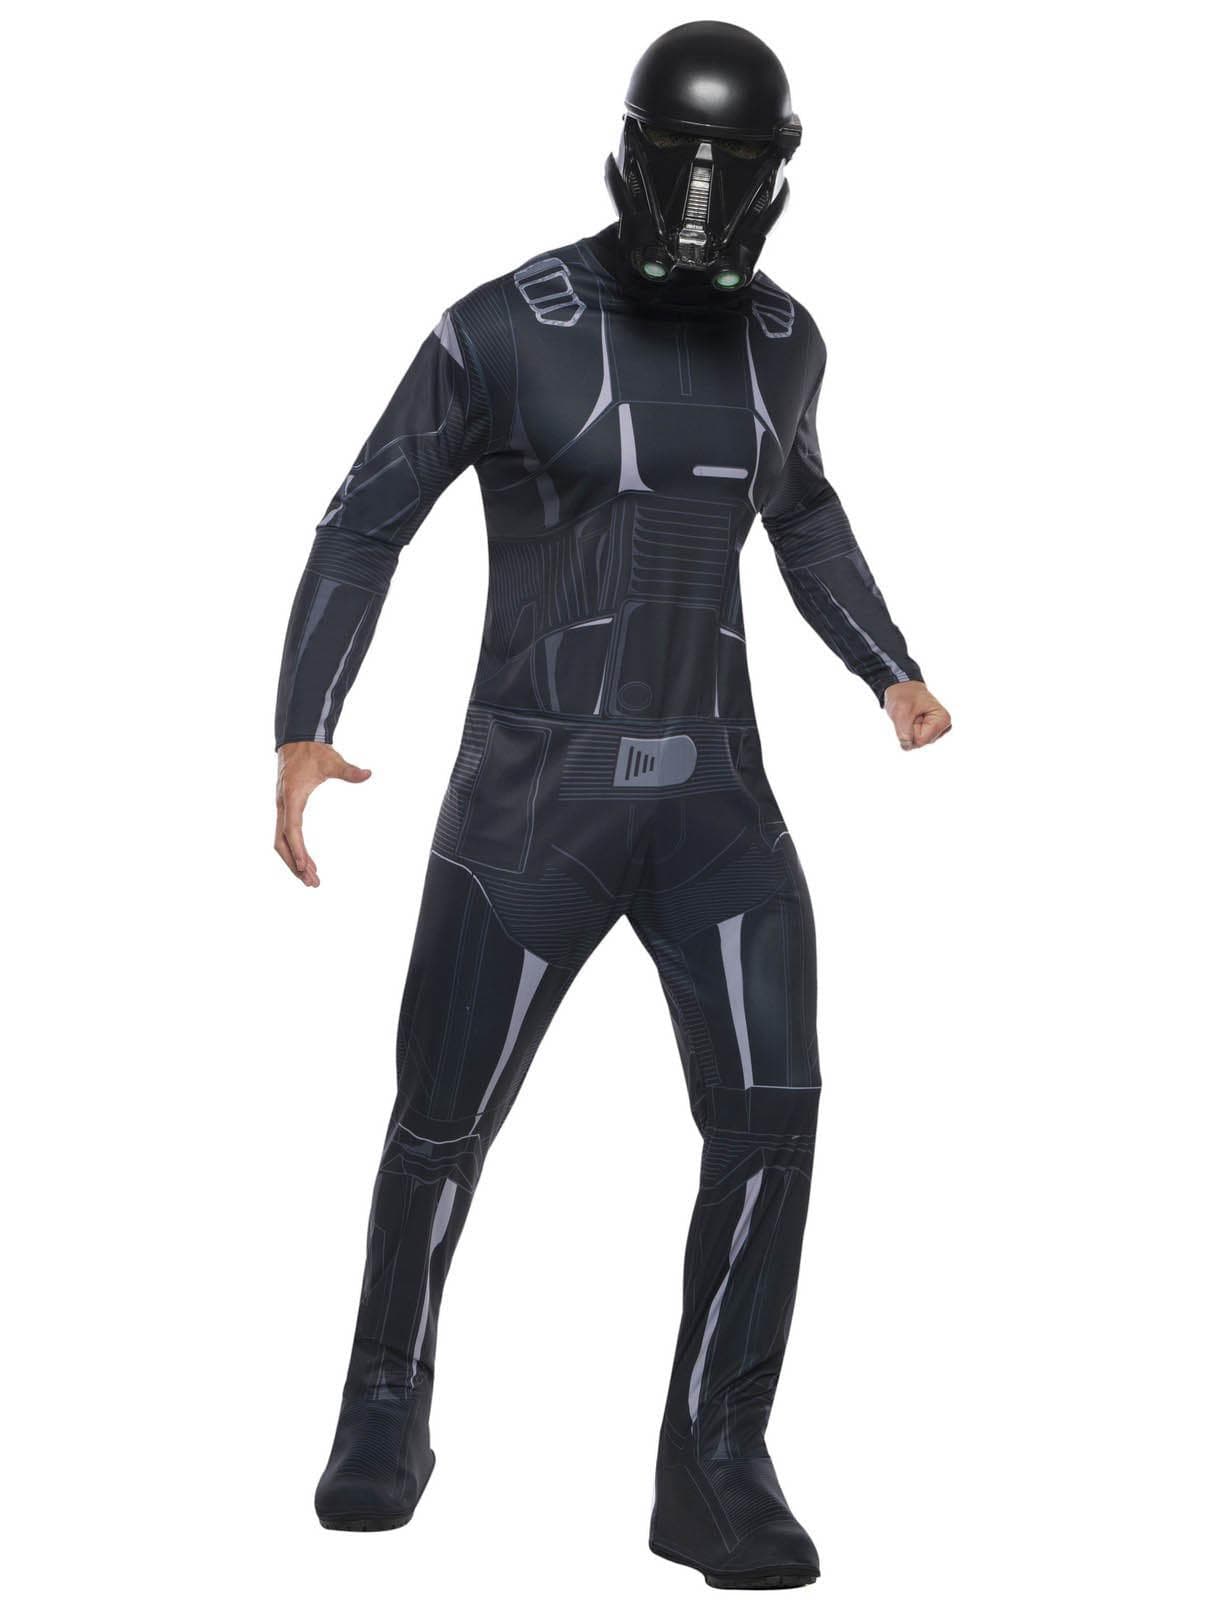 Rogue One Death Trooper Deluxe Adult Costume - costumes.com